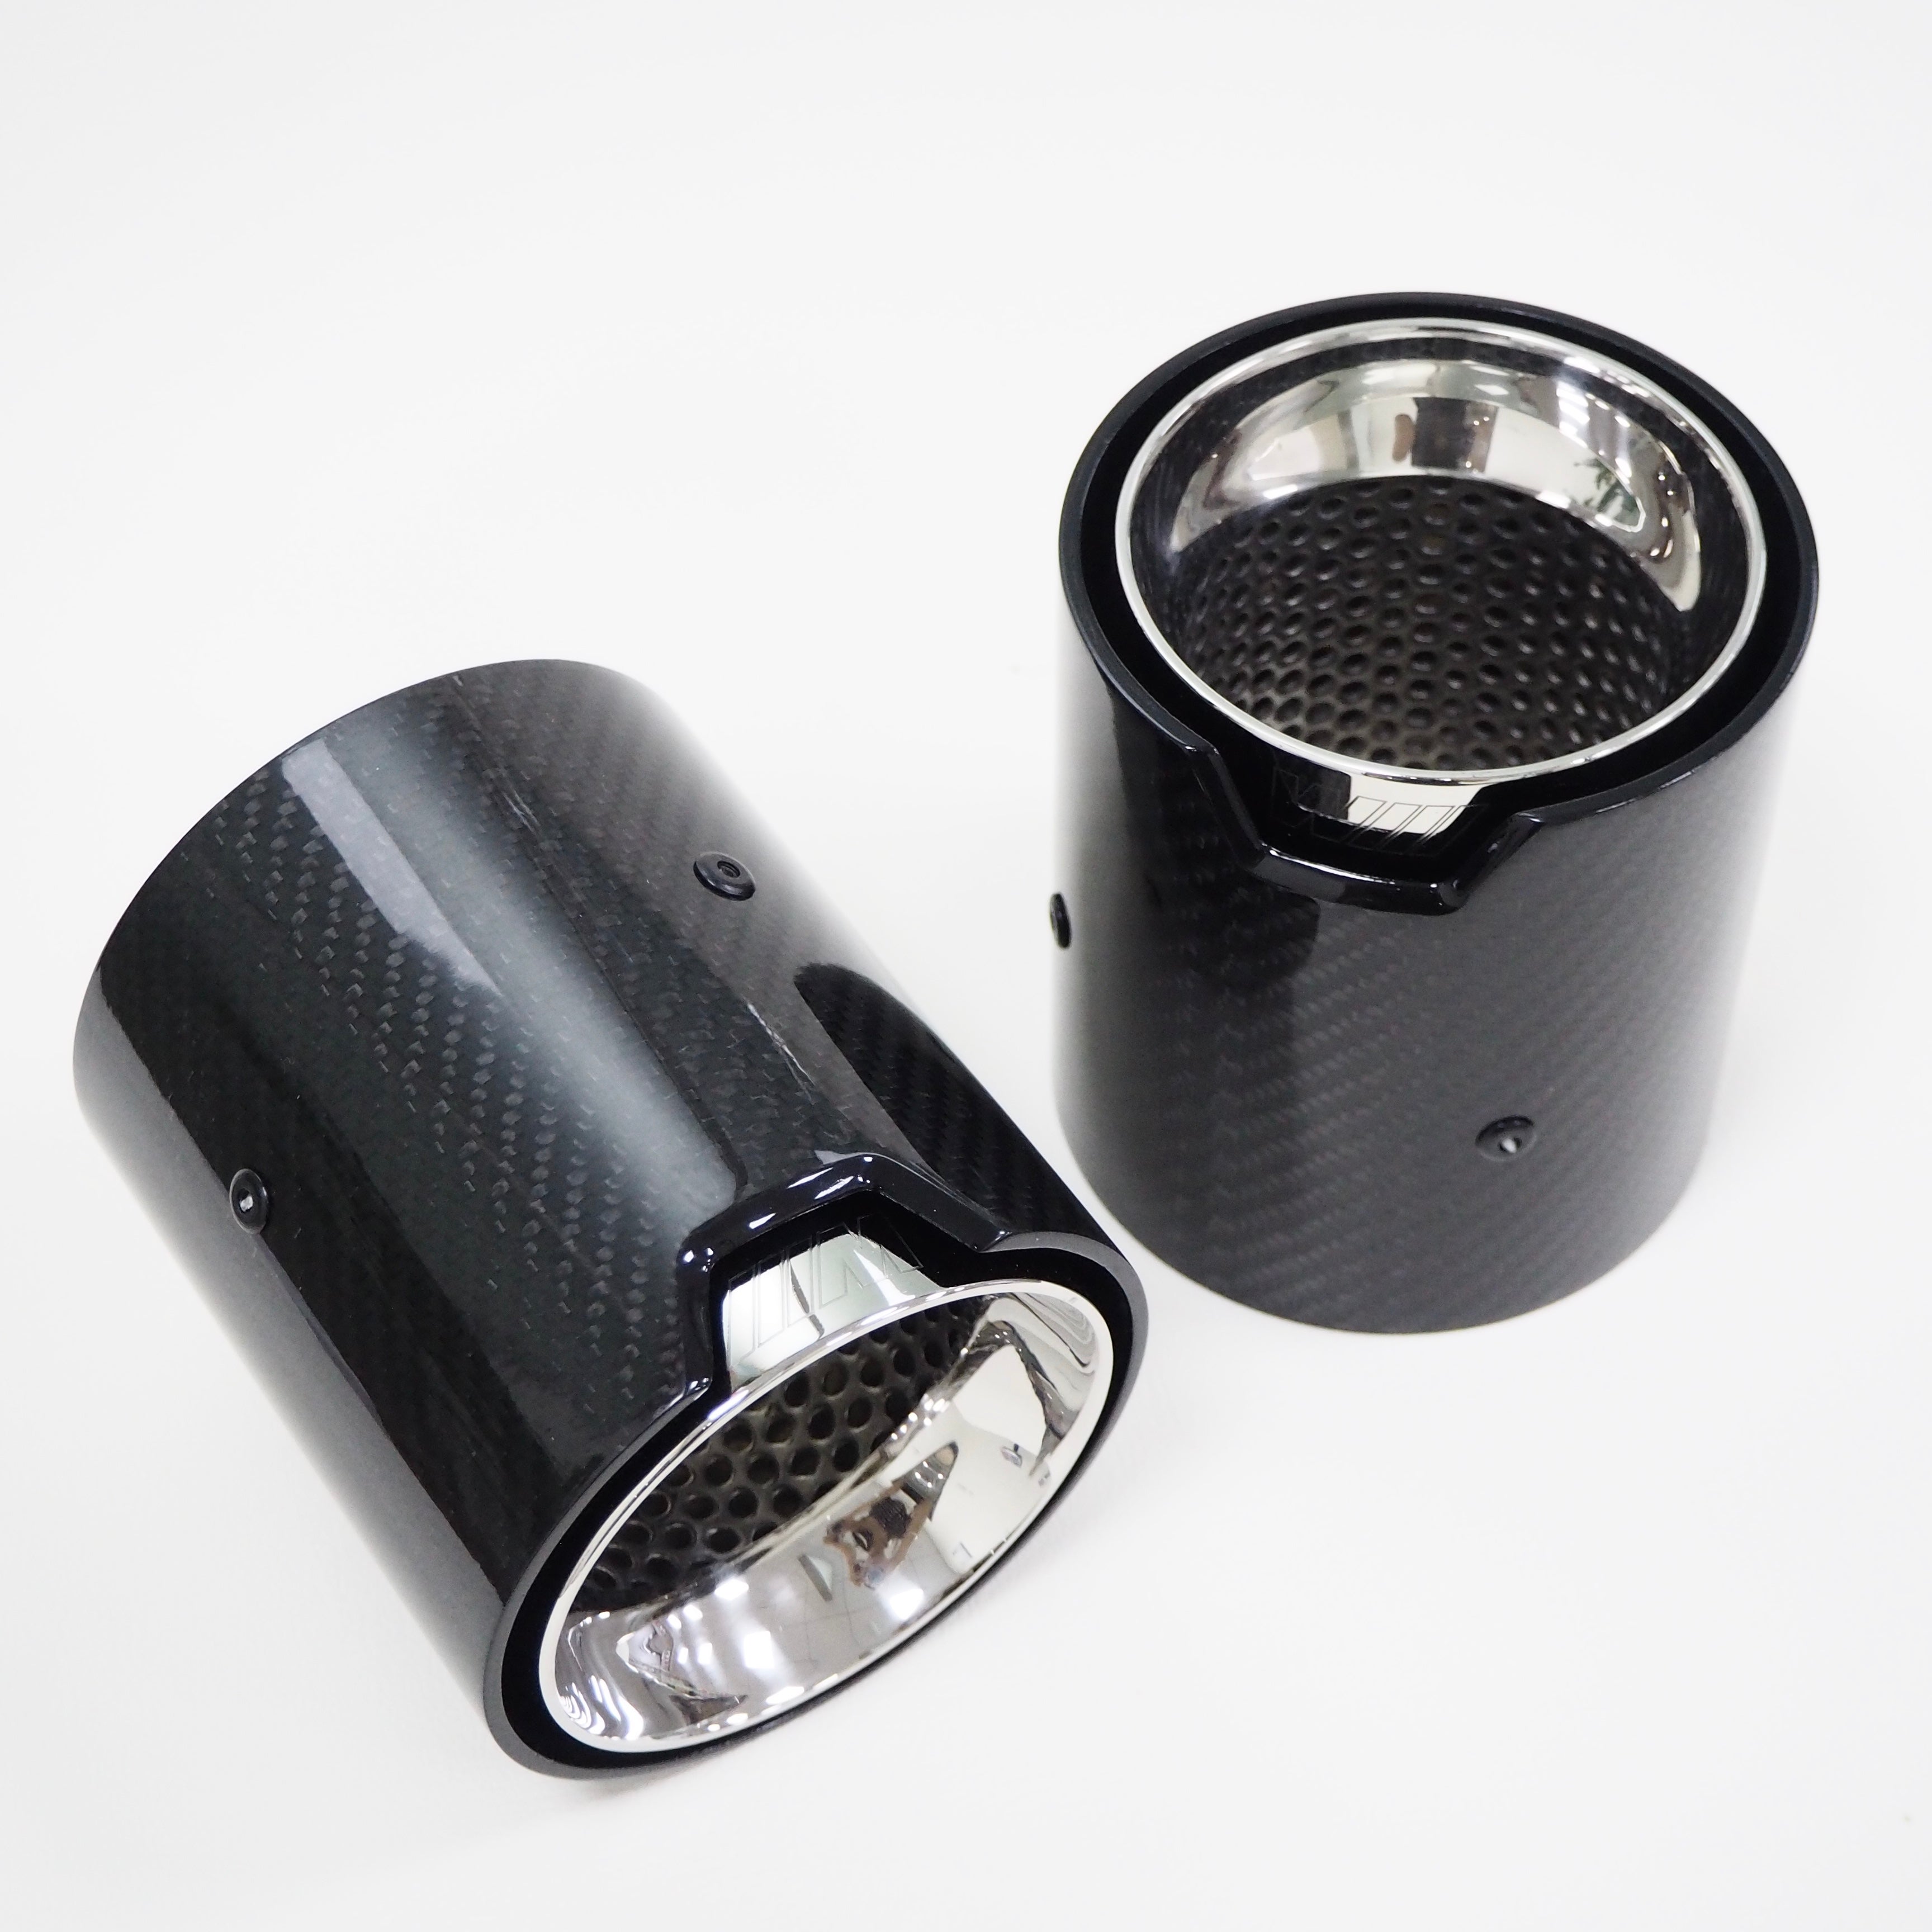 BMW 535I 535D 640I 640D Carbon Fibre M Performance Exhaust Tips - Designed to fit the Standard exhaust systems for the twin outlet exhaust systems on the 35I 40D Model BMWs. This product is manufactured using 304 Stainless steel Coated in black high-temperature paint and Real 2*2 Twill Carbon Fibre Shells. 